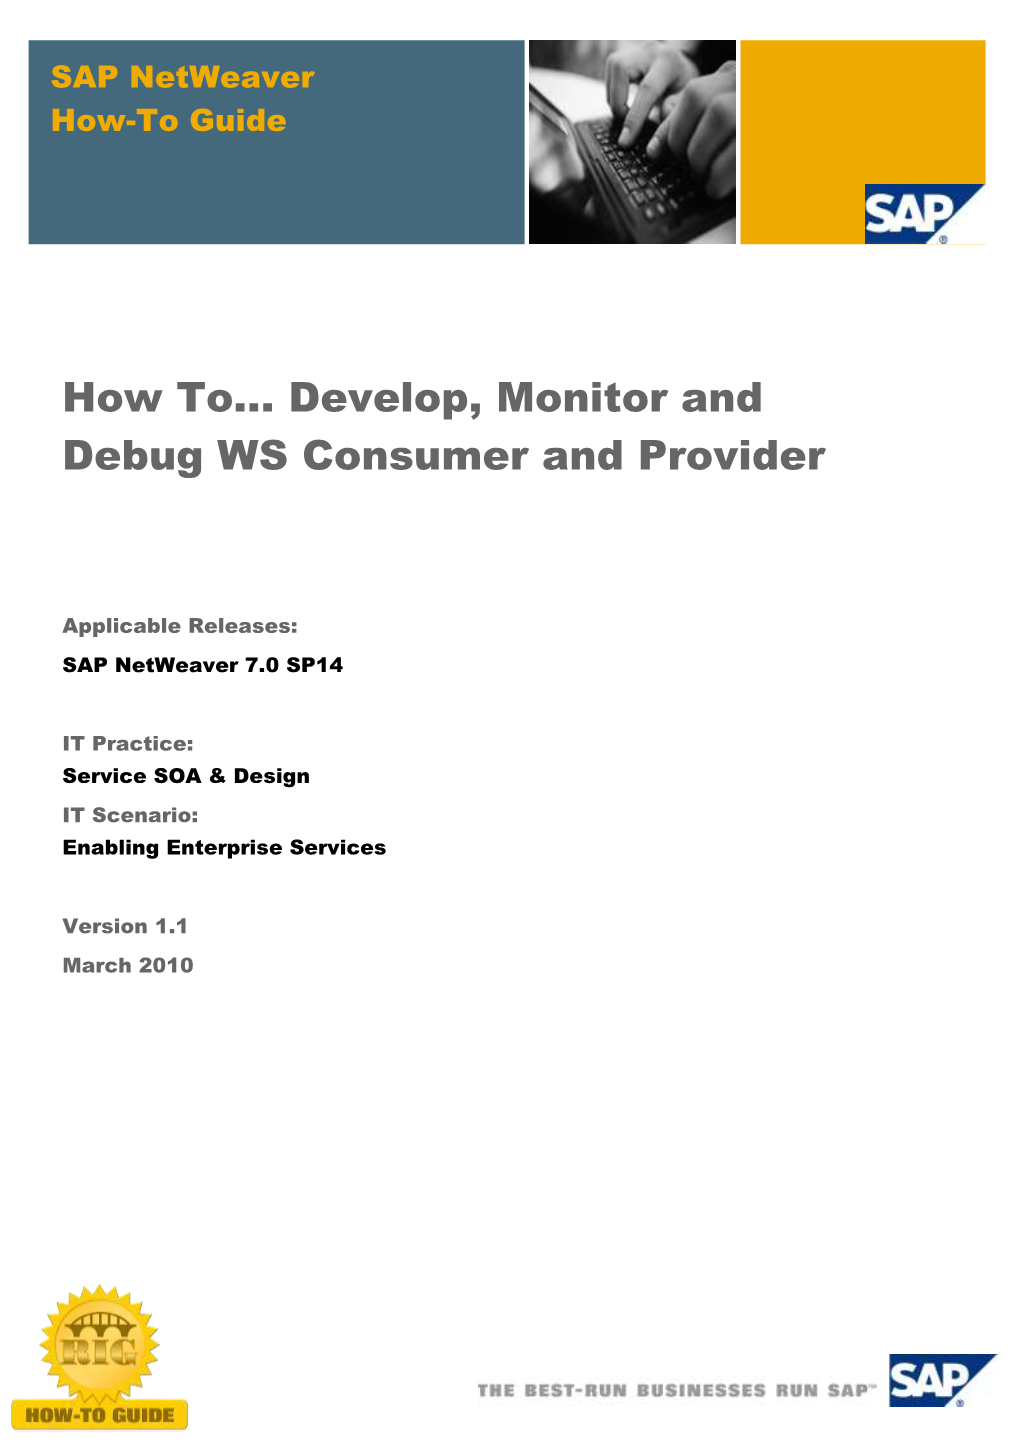 How To... Develop, Monitor and Debug WS Consumer and Provider